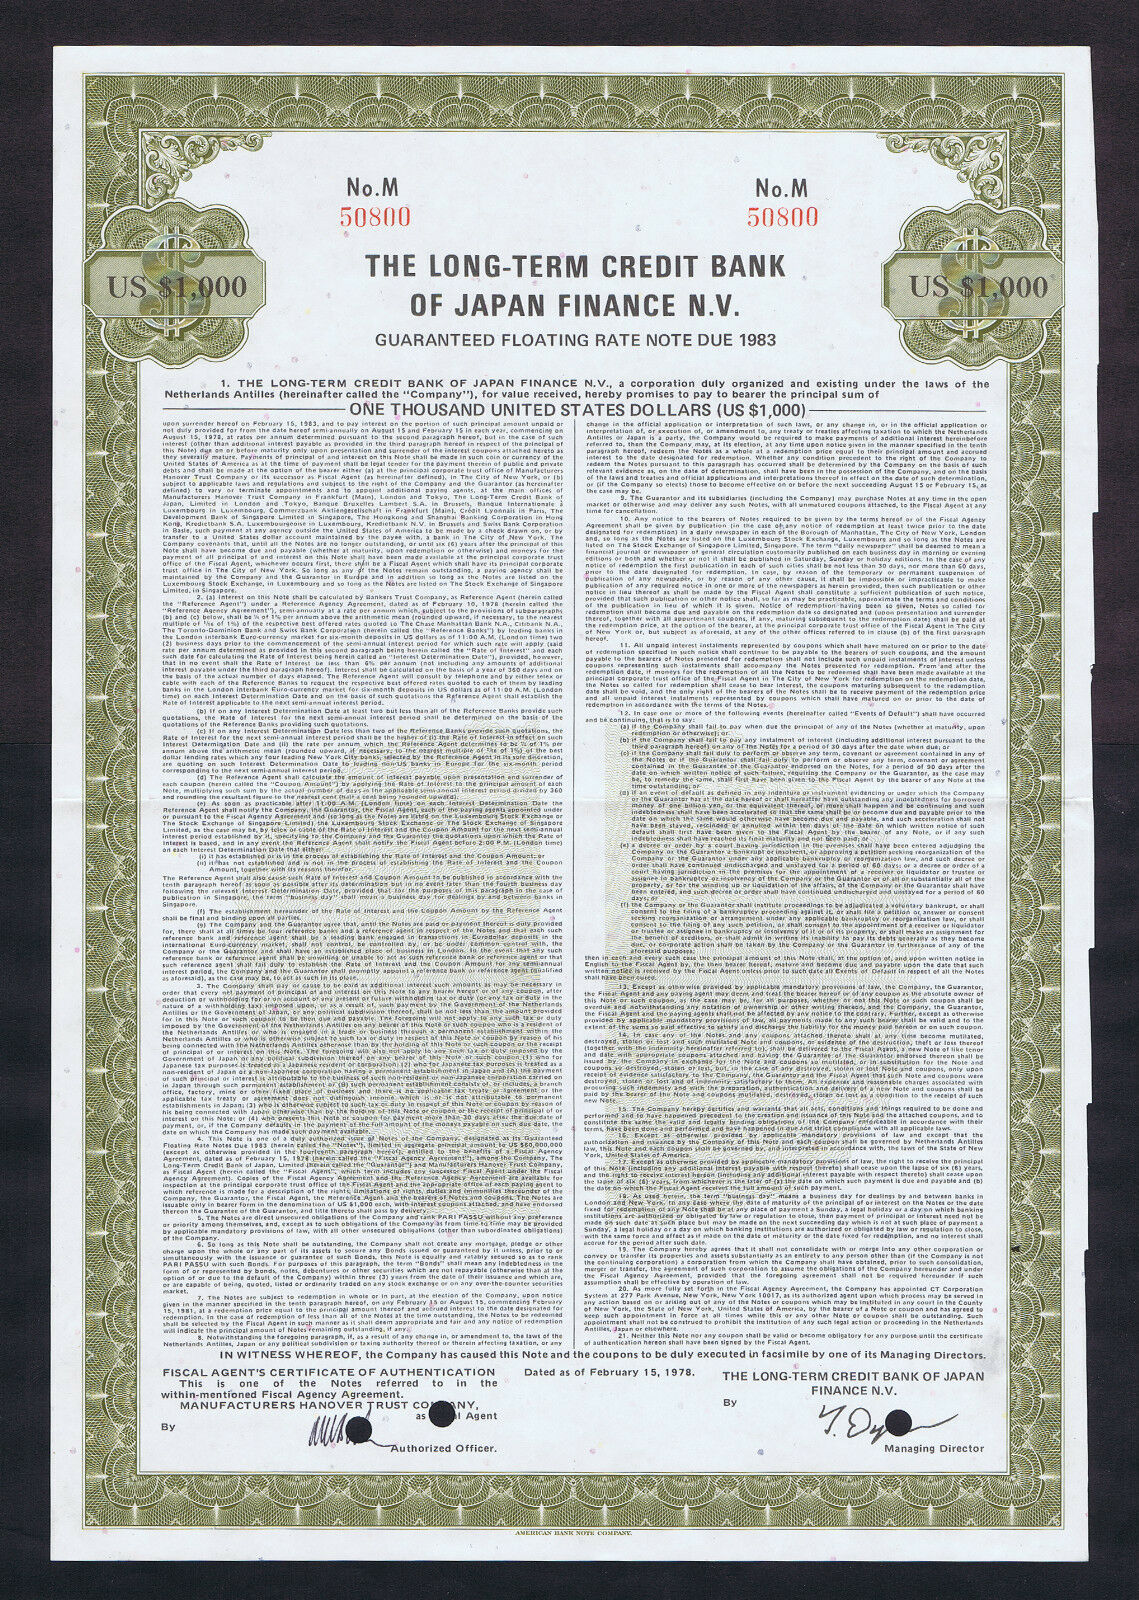 LONG TERM CREDIT BANK of JAPAN FINANCE N.V. DUE 1983 with AWESOME SERIAL # 50800